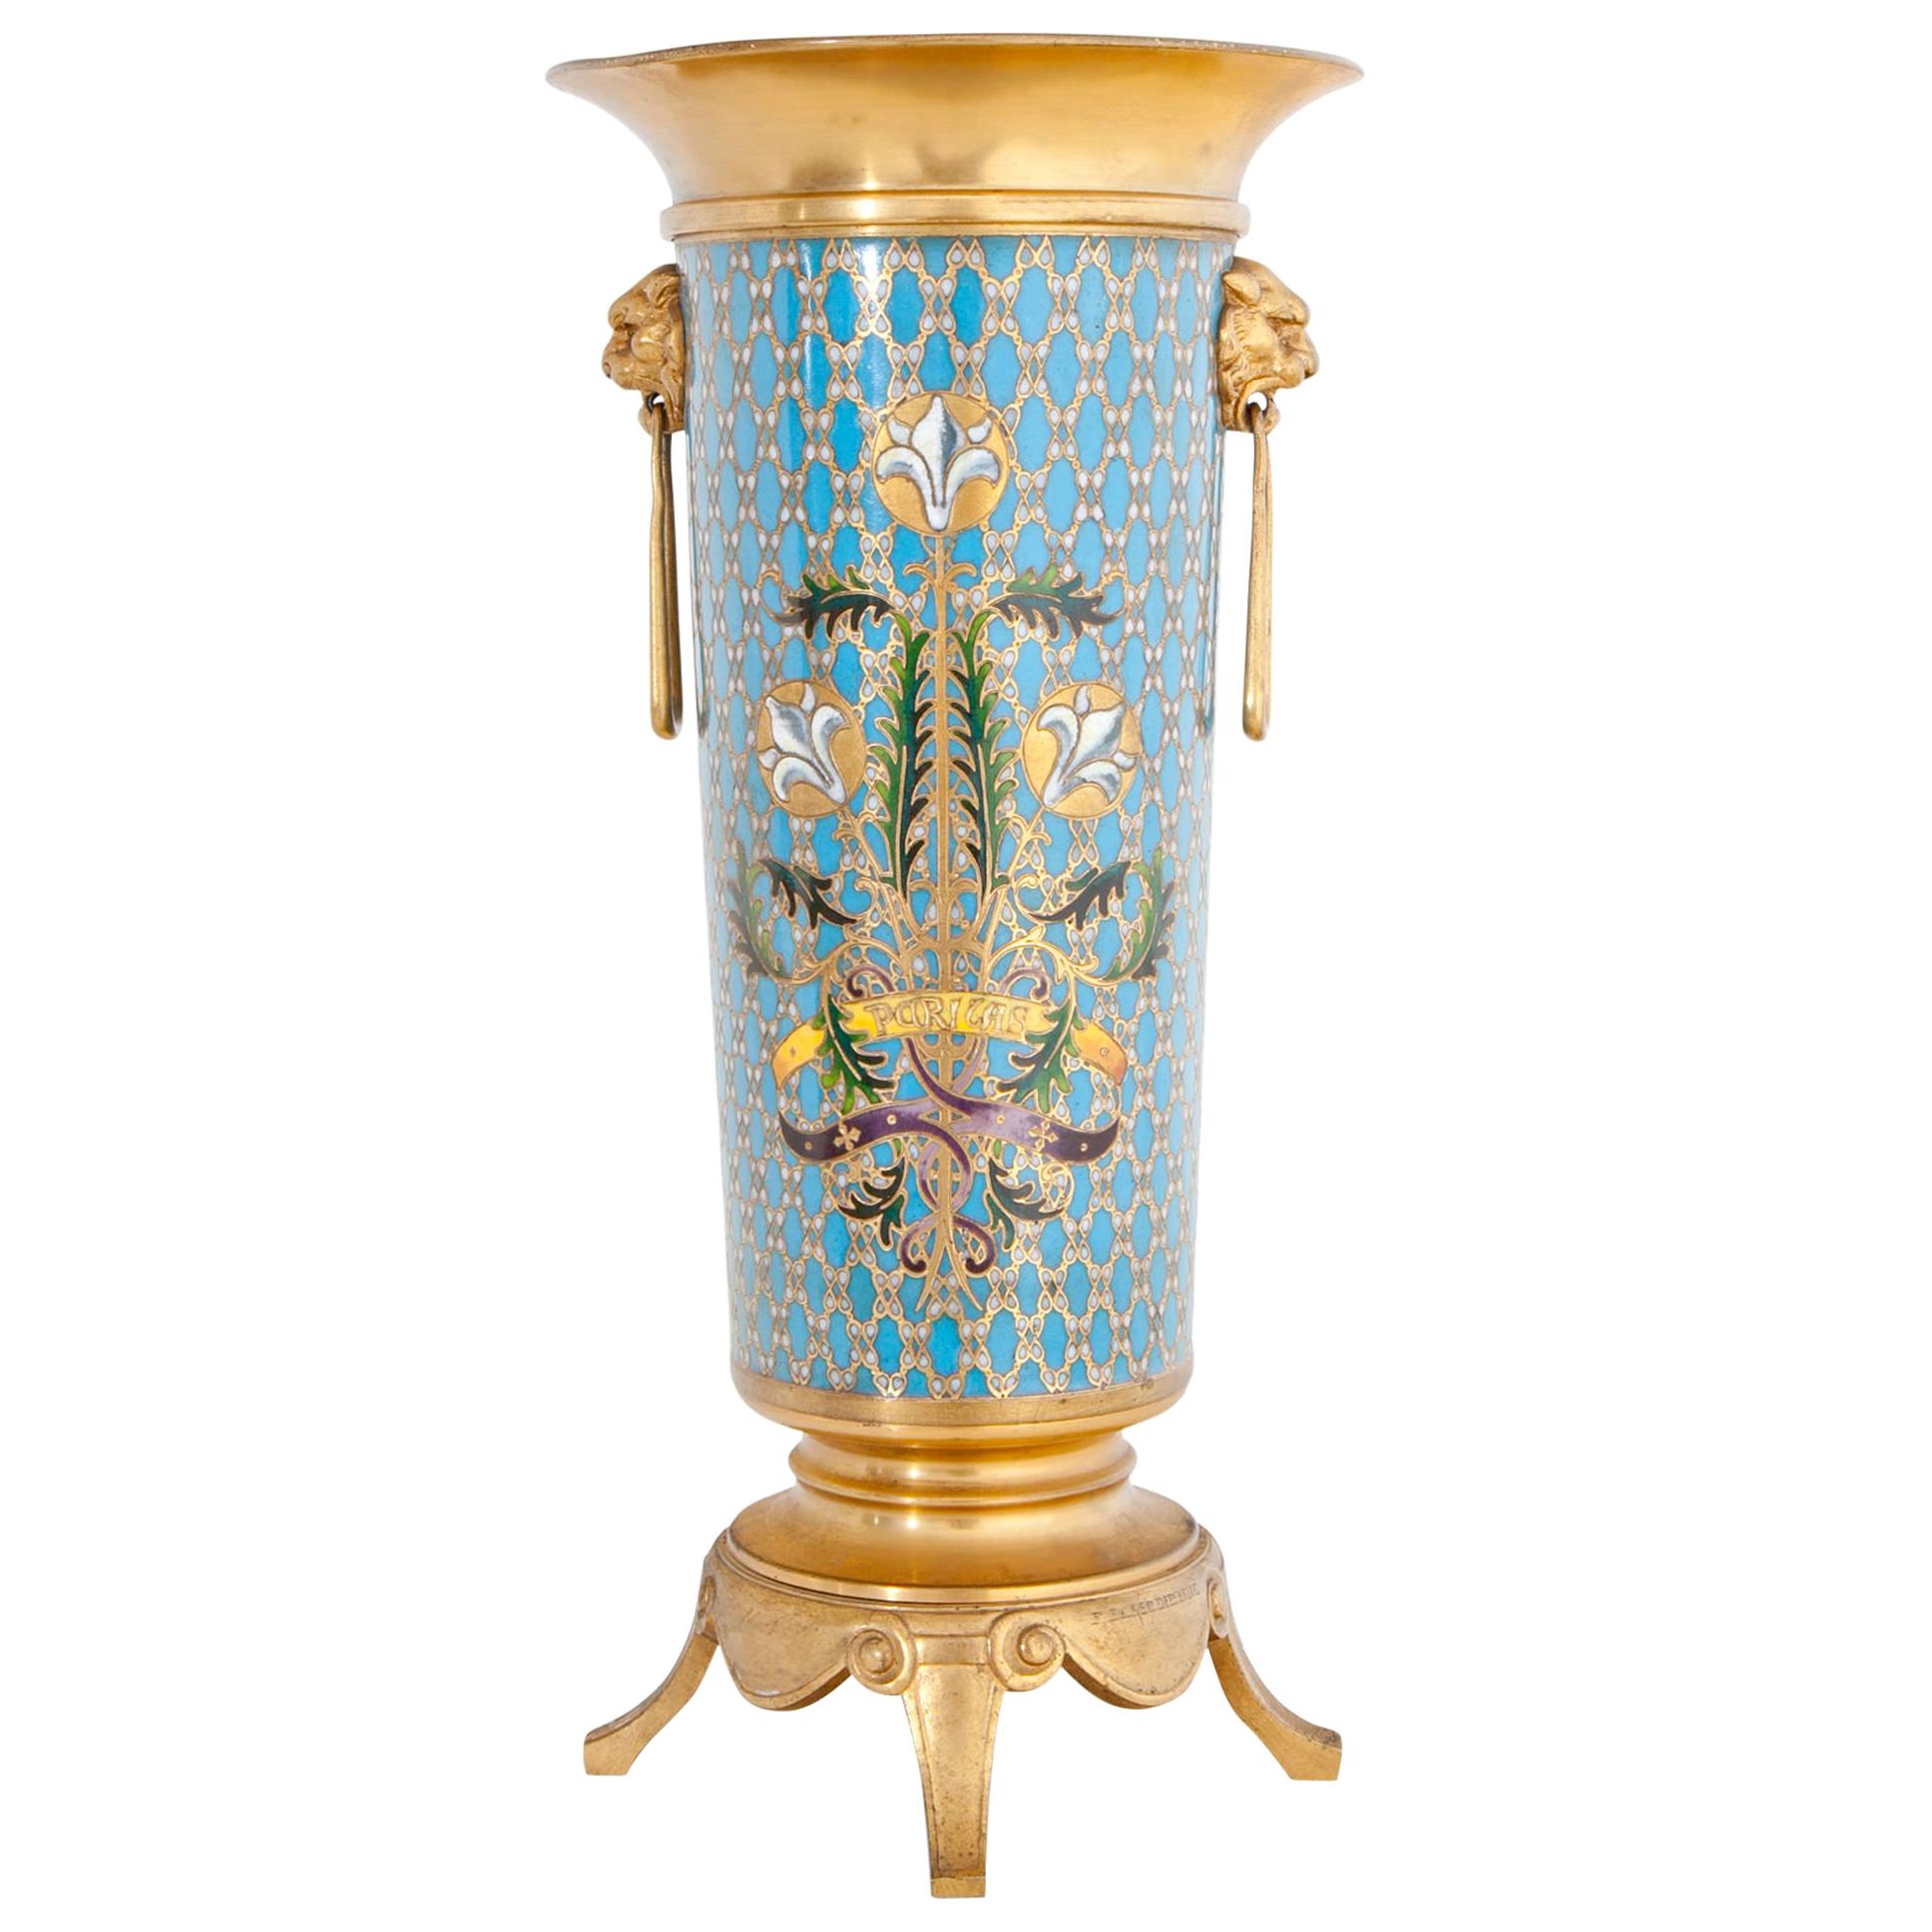 Cloisonné Vase, Signed Barbedienne, France, Second Half of the 19th Century